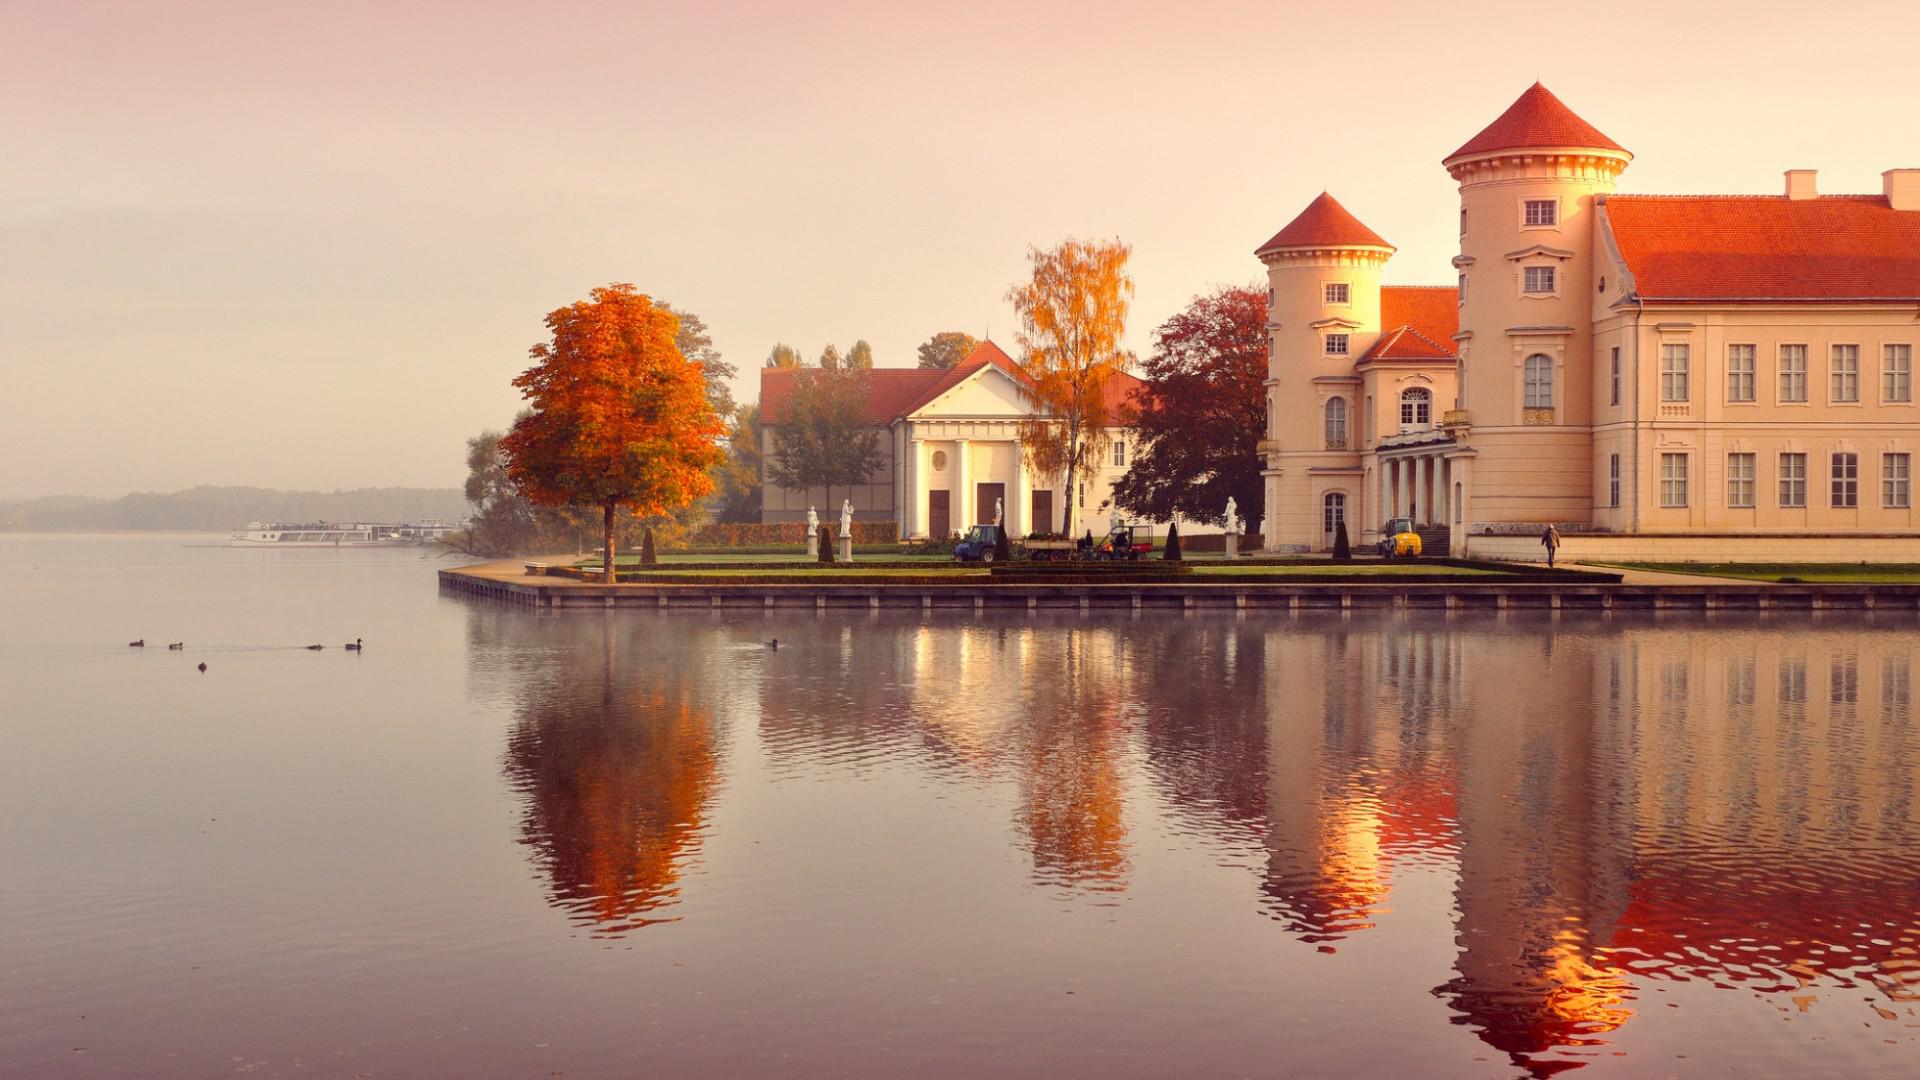 Germany, the fall, the city, the beautiful scenery wallpaper | other ...